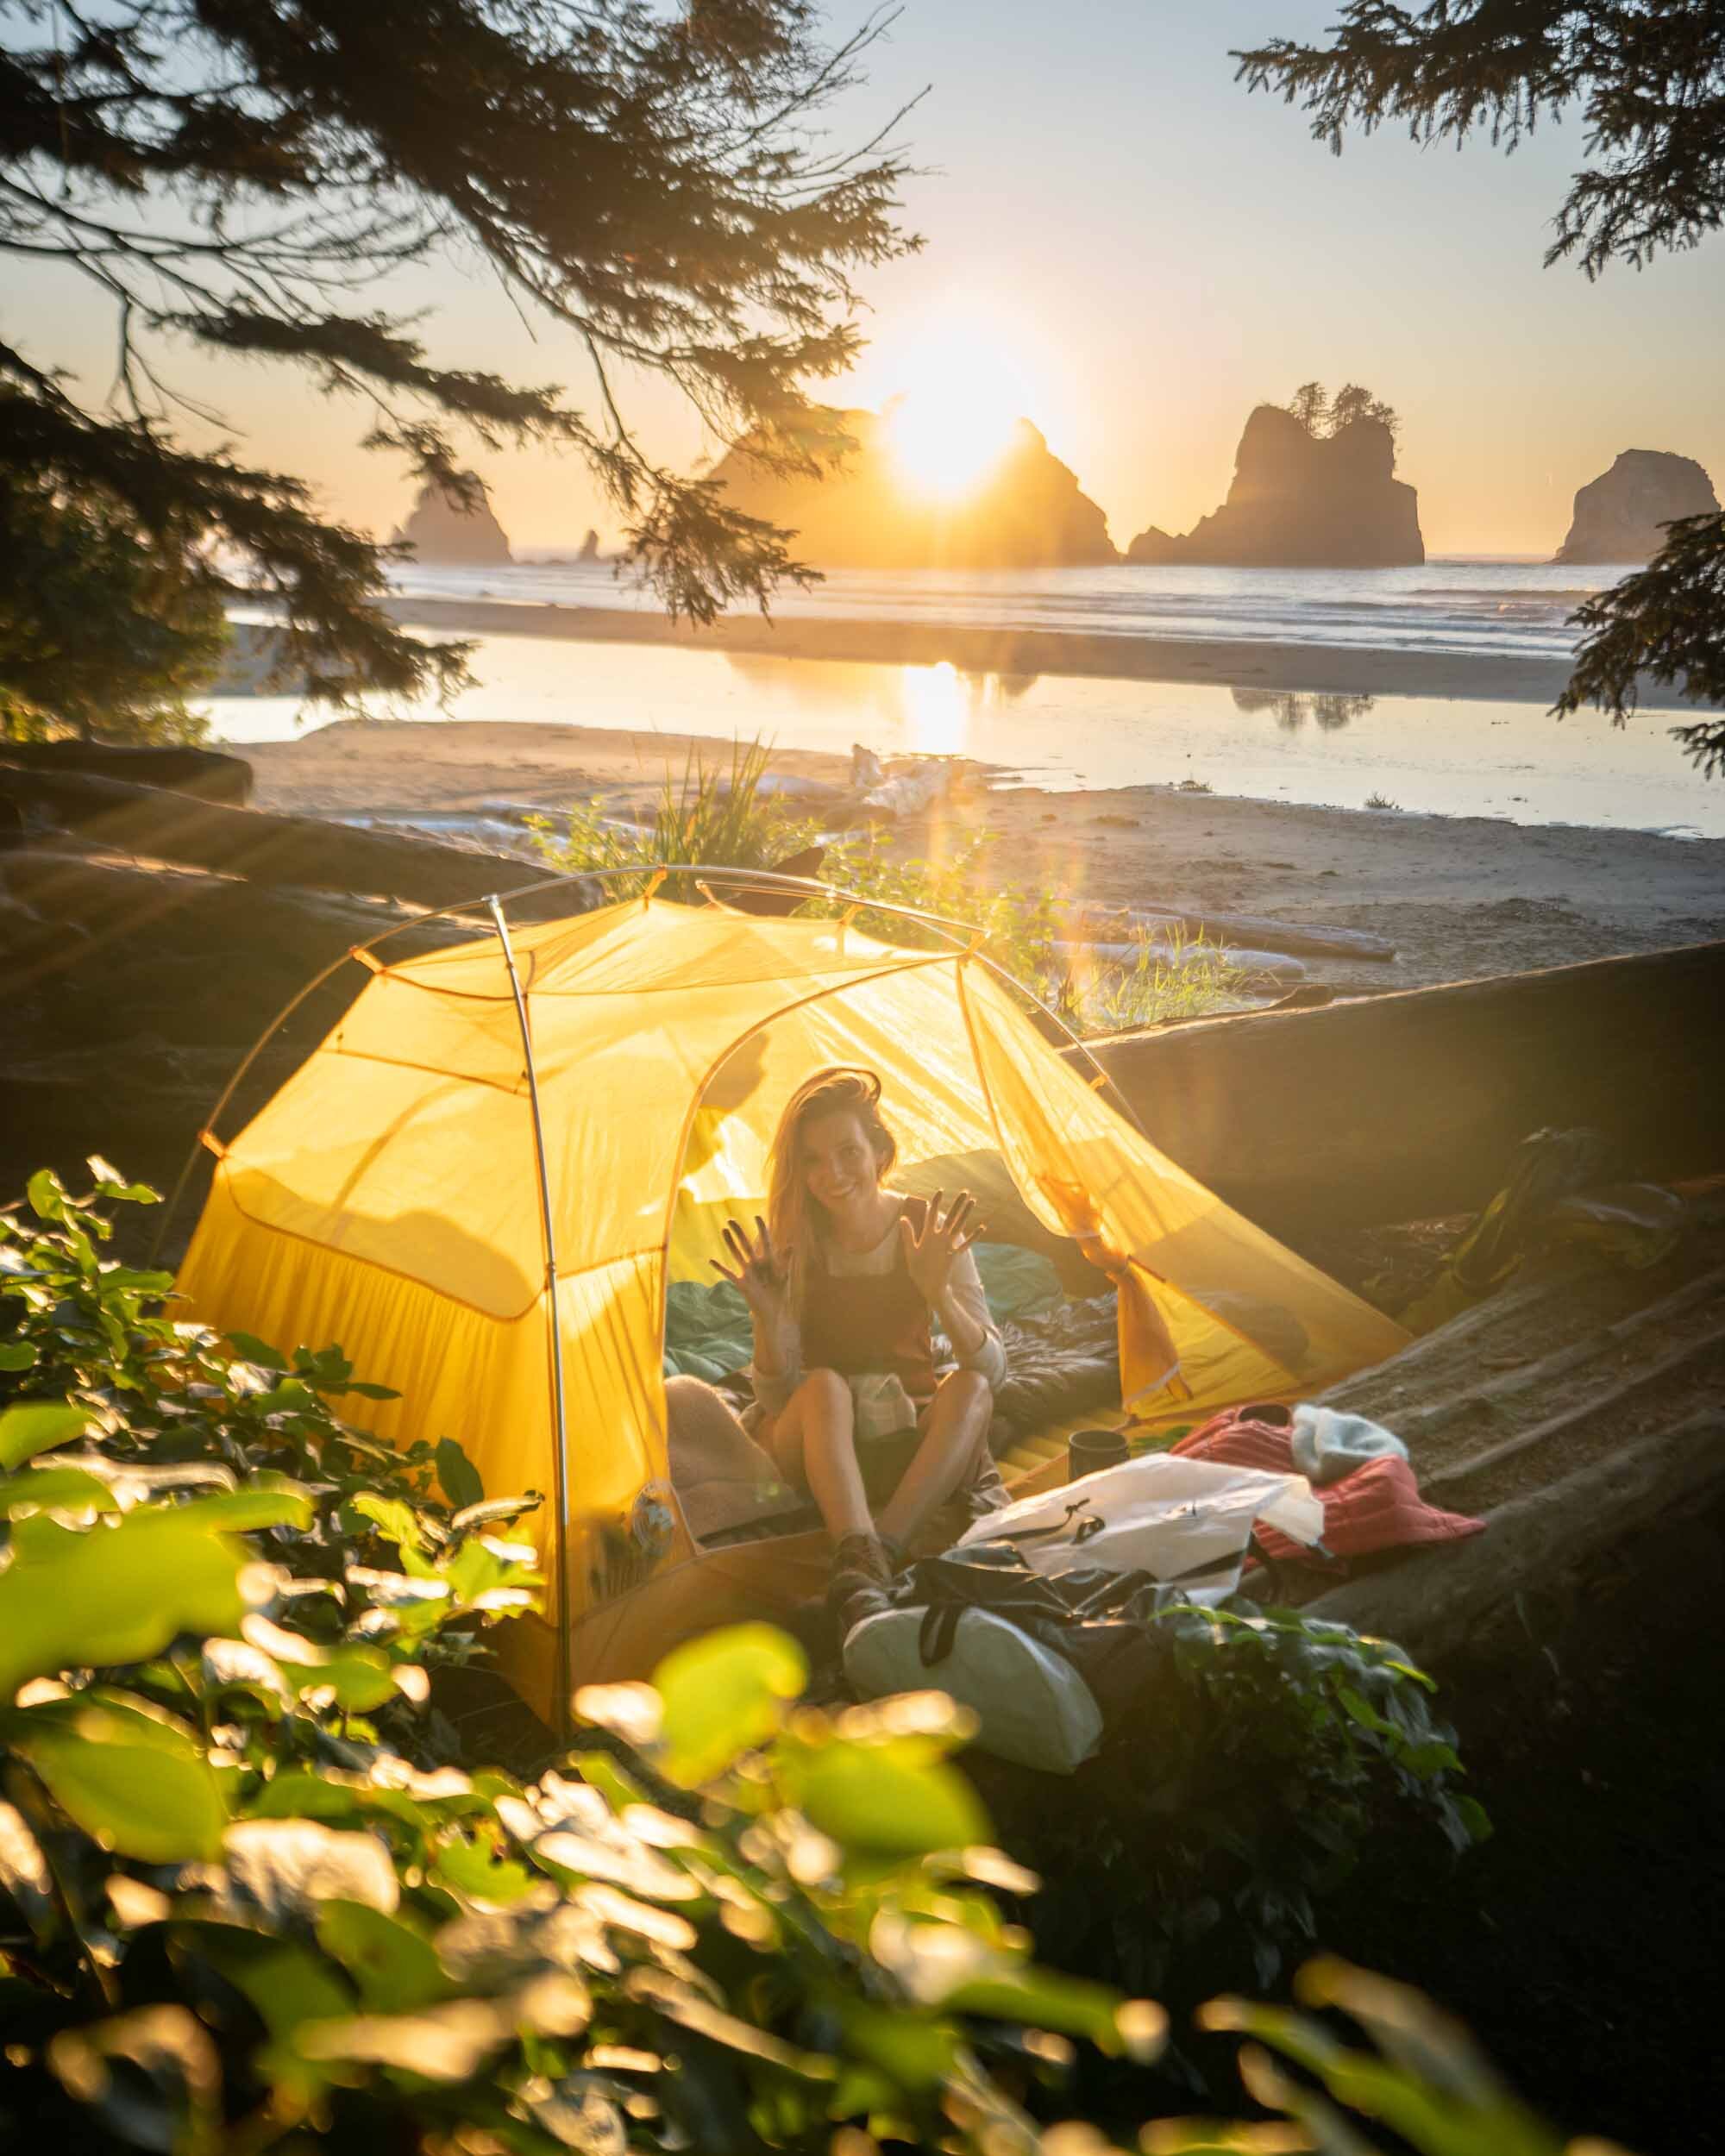 Camping on Shi Shi Beach in Washington State. Wearing: Toad&amp;Co  Jumper  and The North Face  Long Sleeve Shirt . Also Shown: Big Agnes  2 Person Tent .